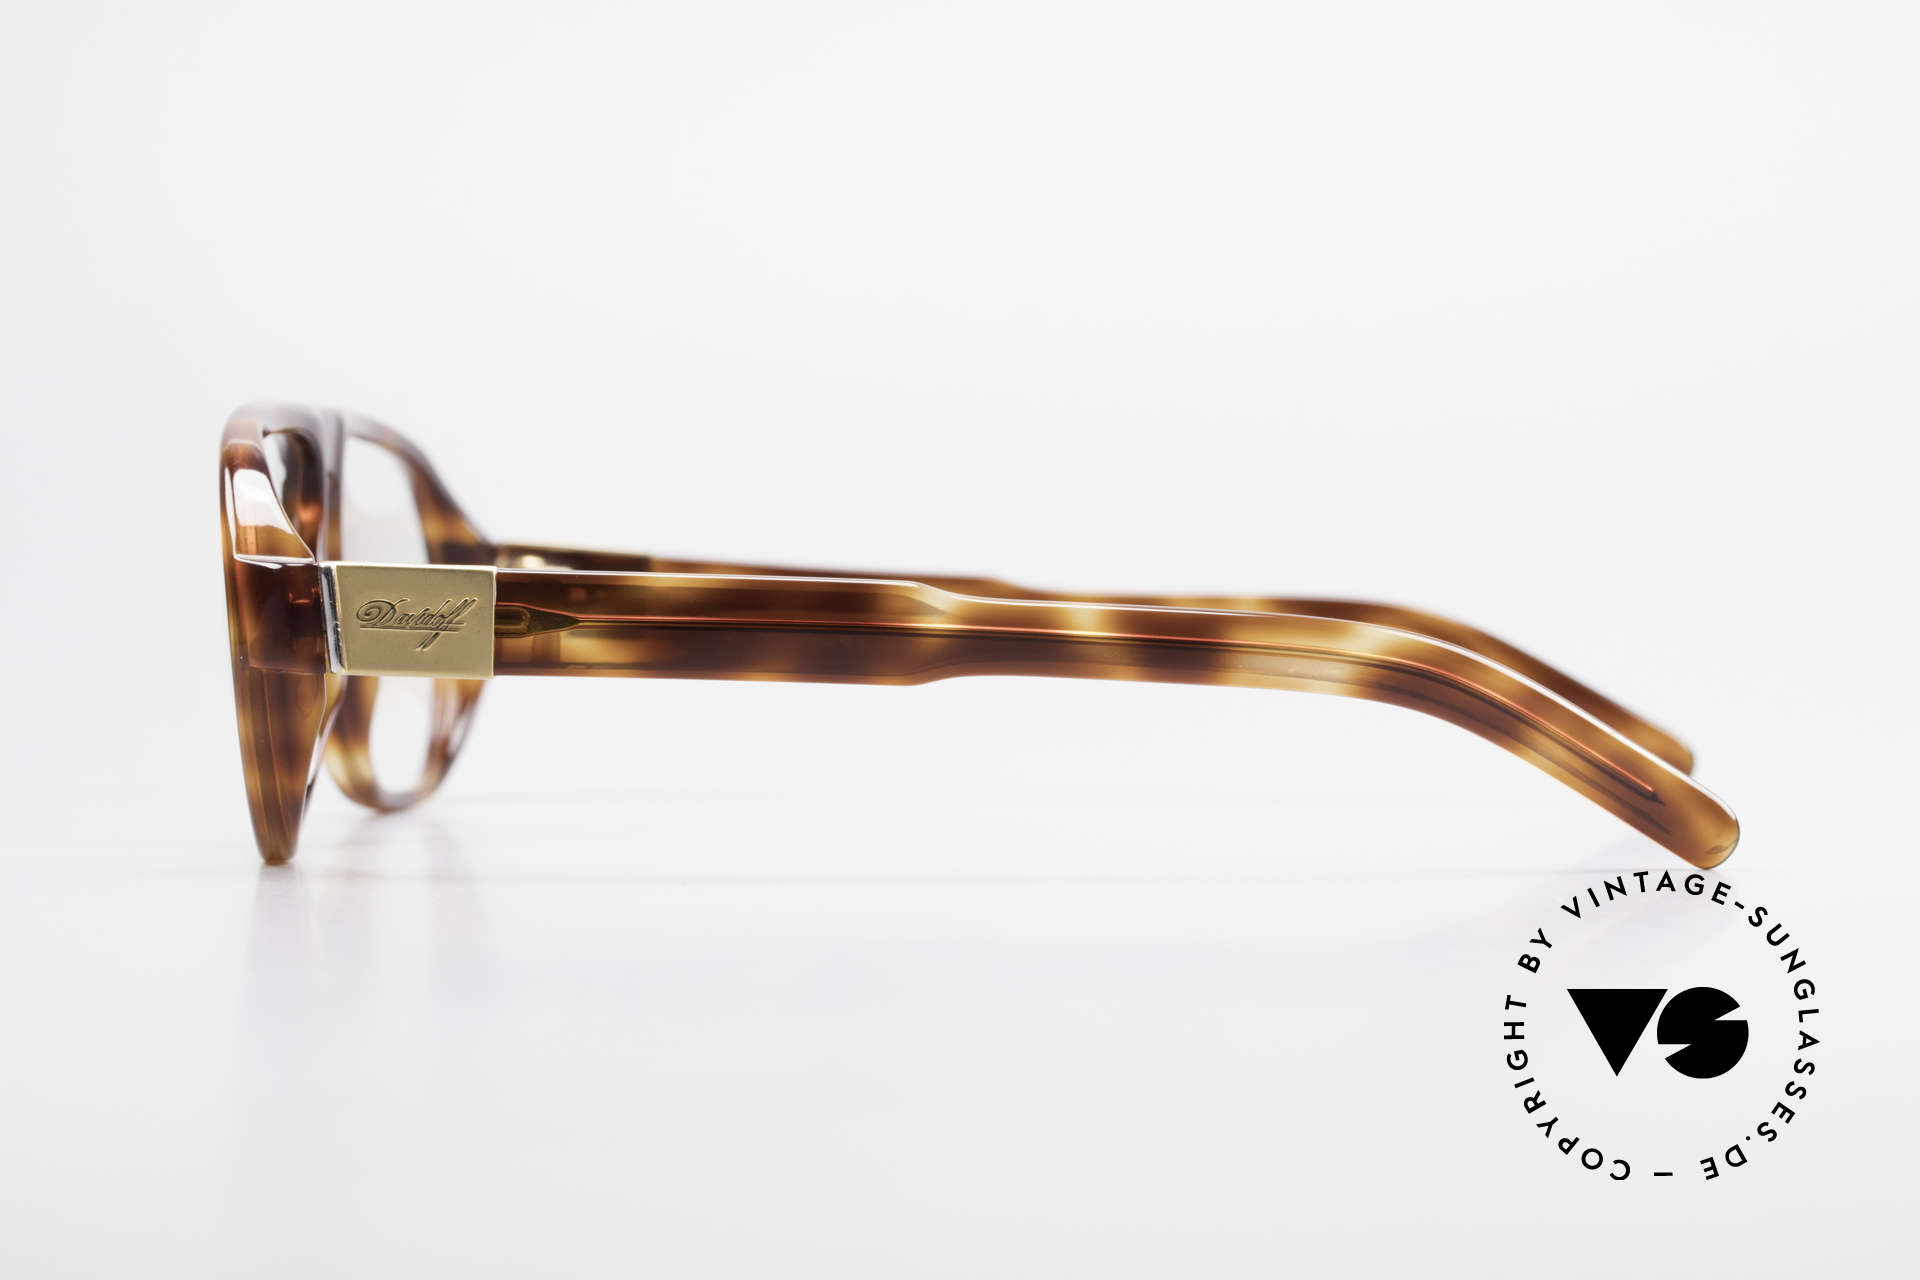 Davidoff 100 90's Men's Vintage Frame, vintage model for fashion enthusiasts; simply stylish, Made for Men